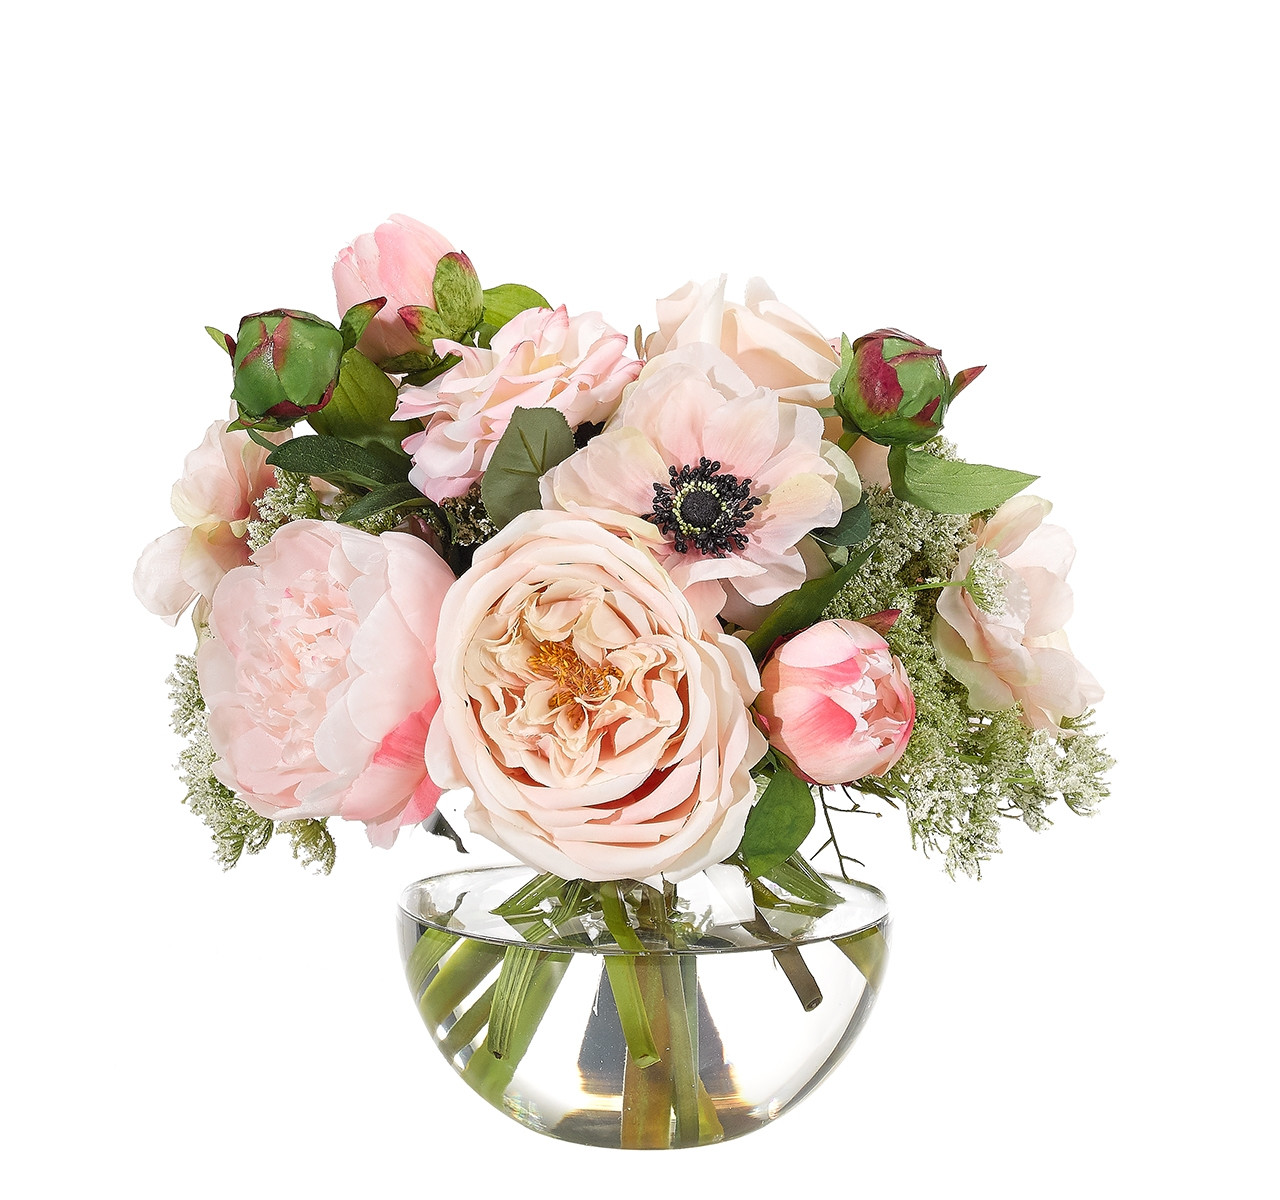 18 Lovable Personalized Vase Flower Delivery 2024 free download personalized vase flower delivery of ndi faux florals and botanicals within custom orders